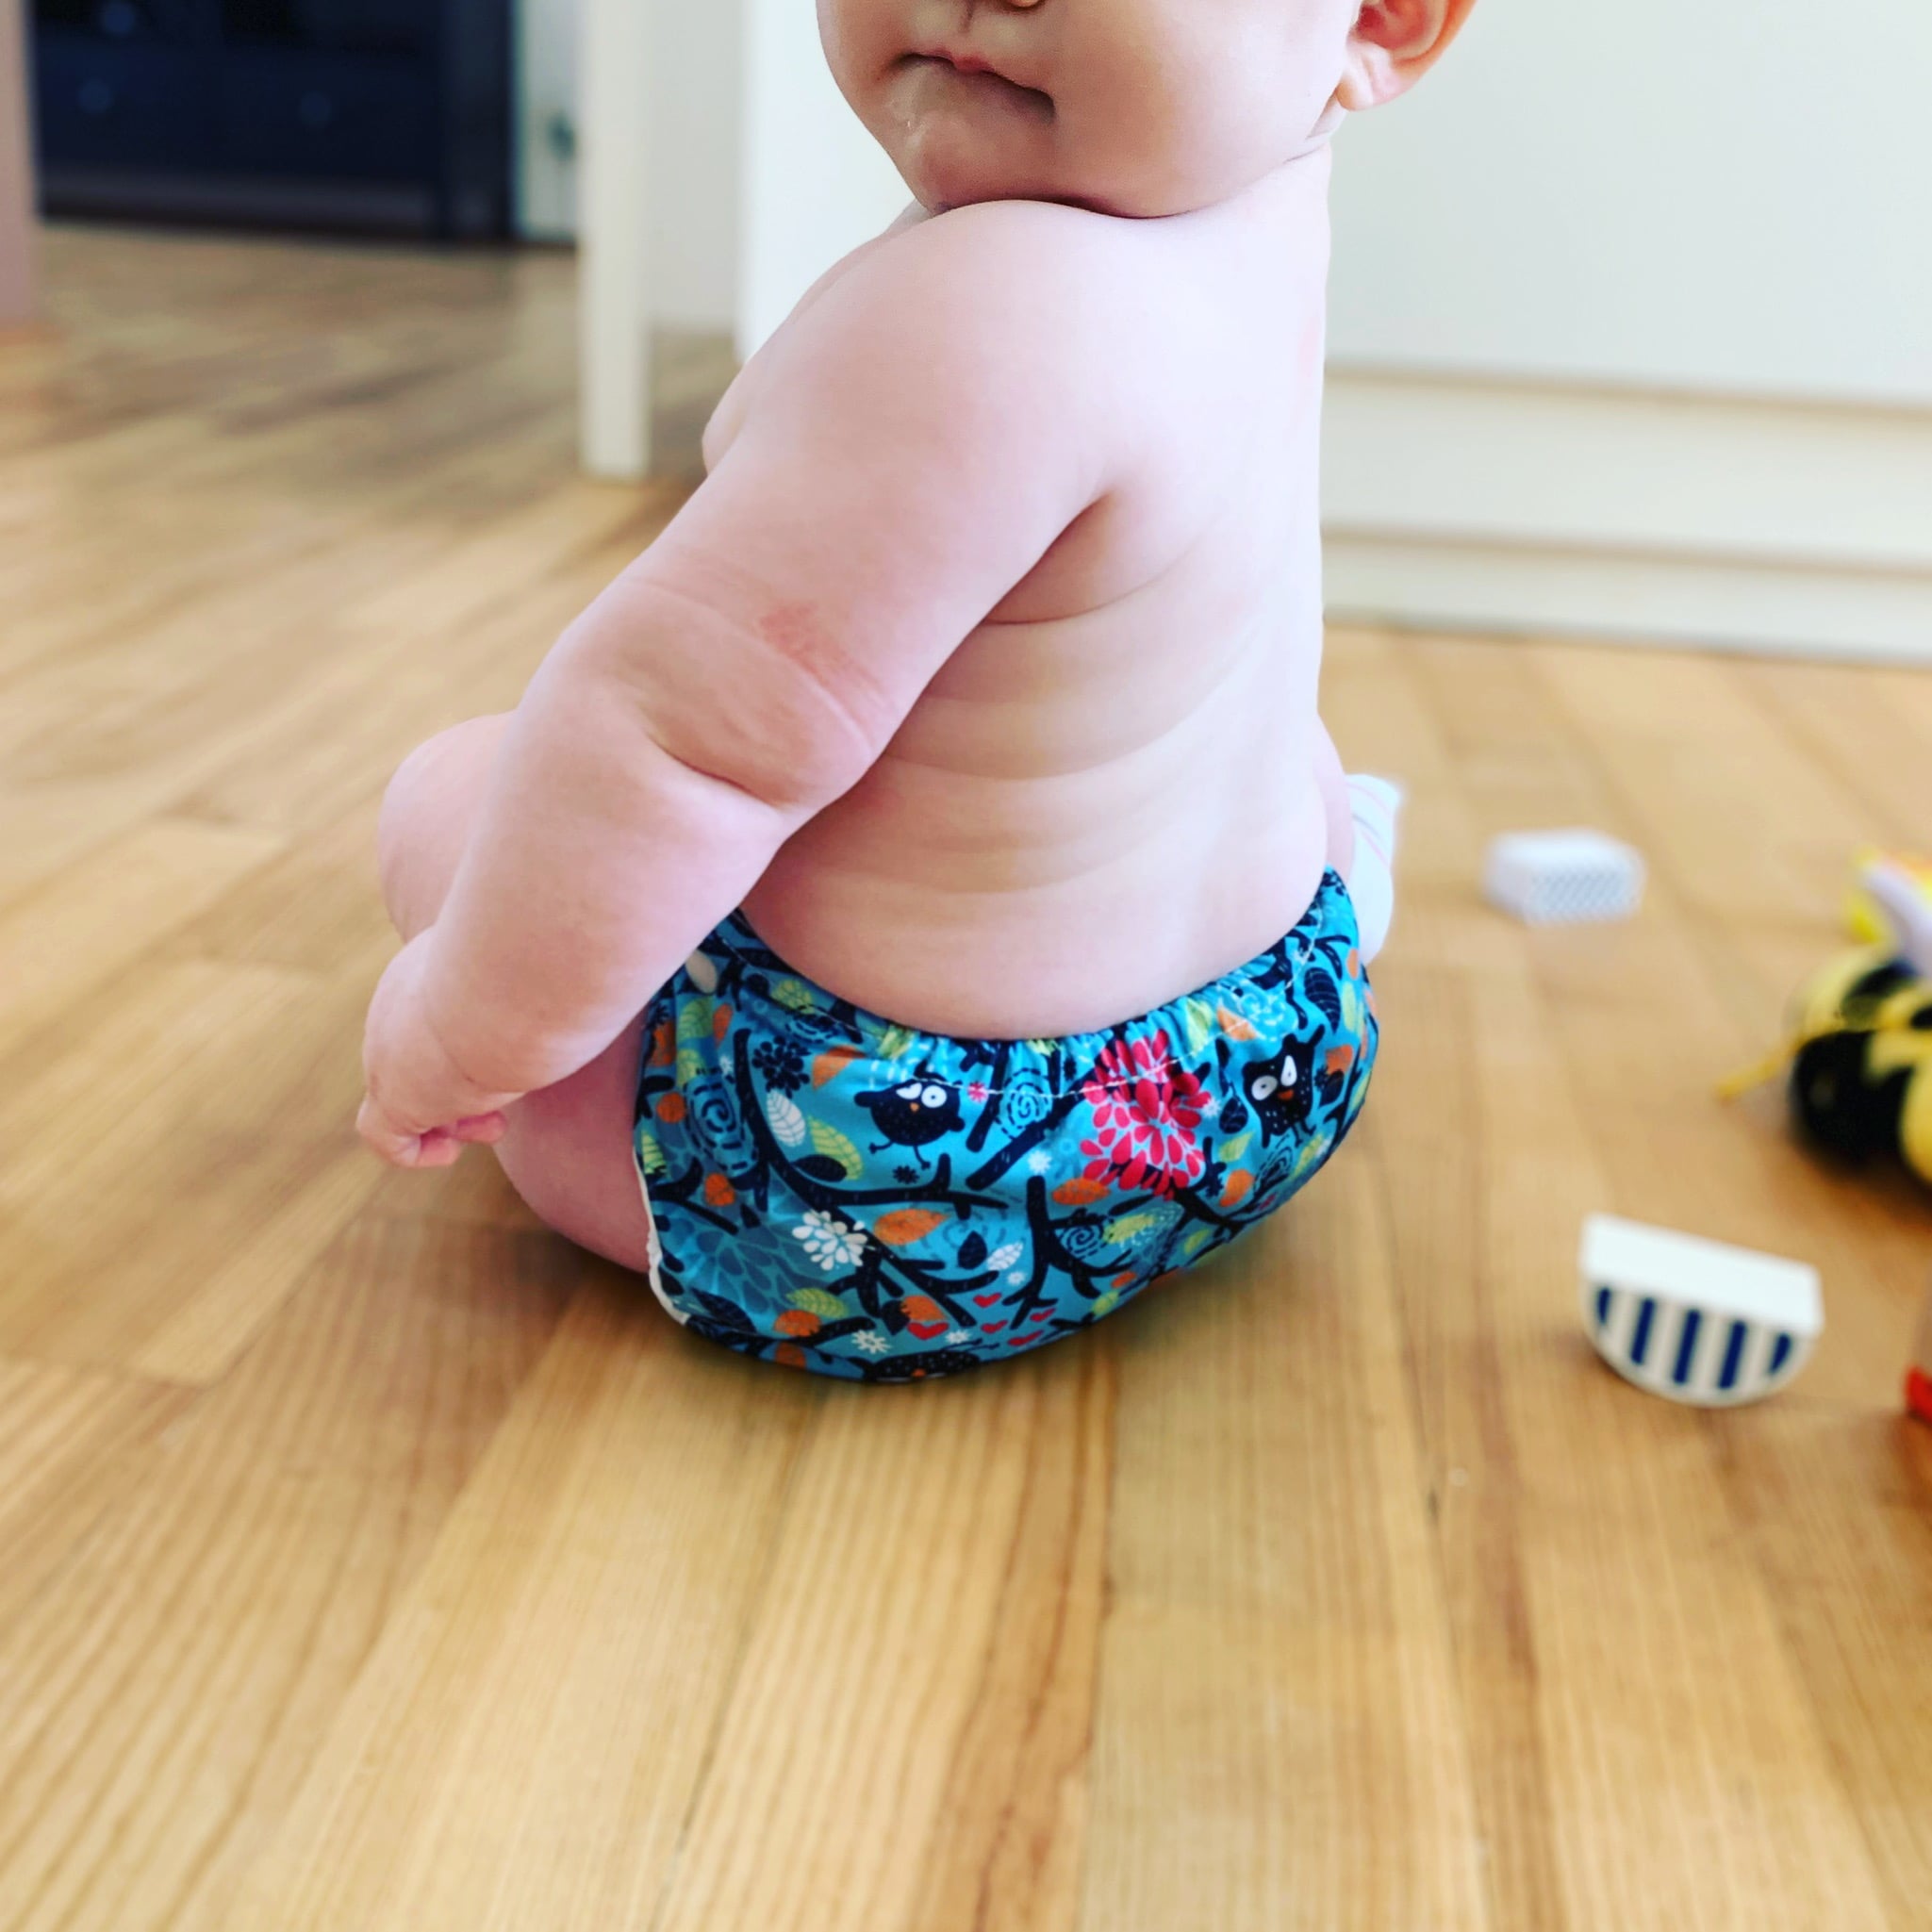 Baby with cloth diaper